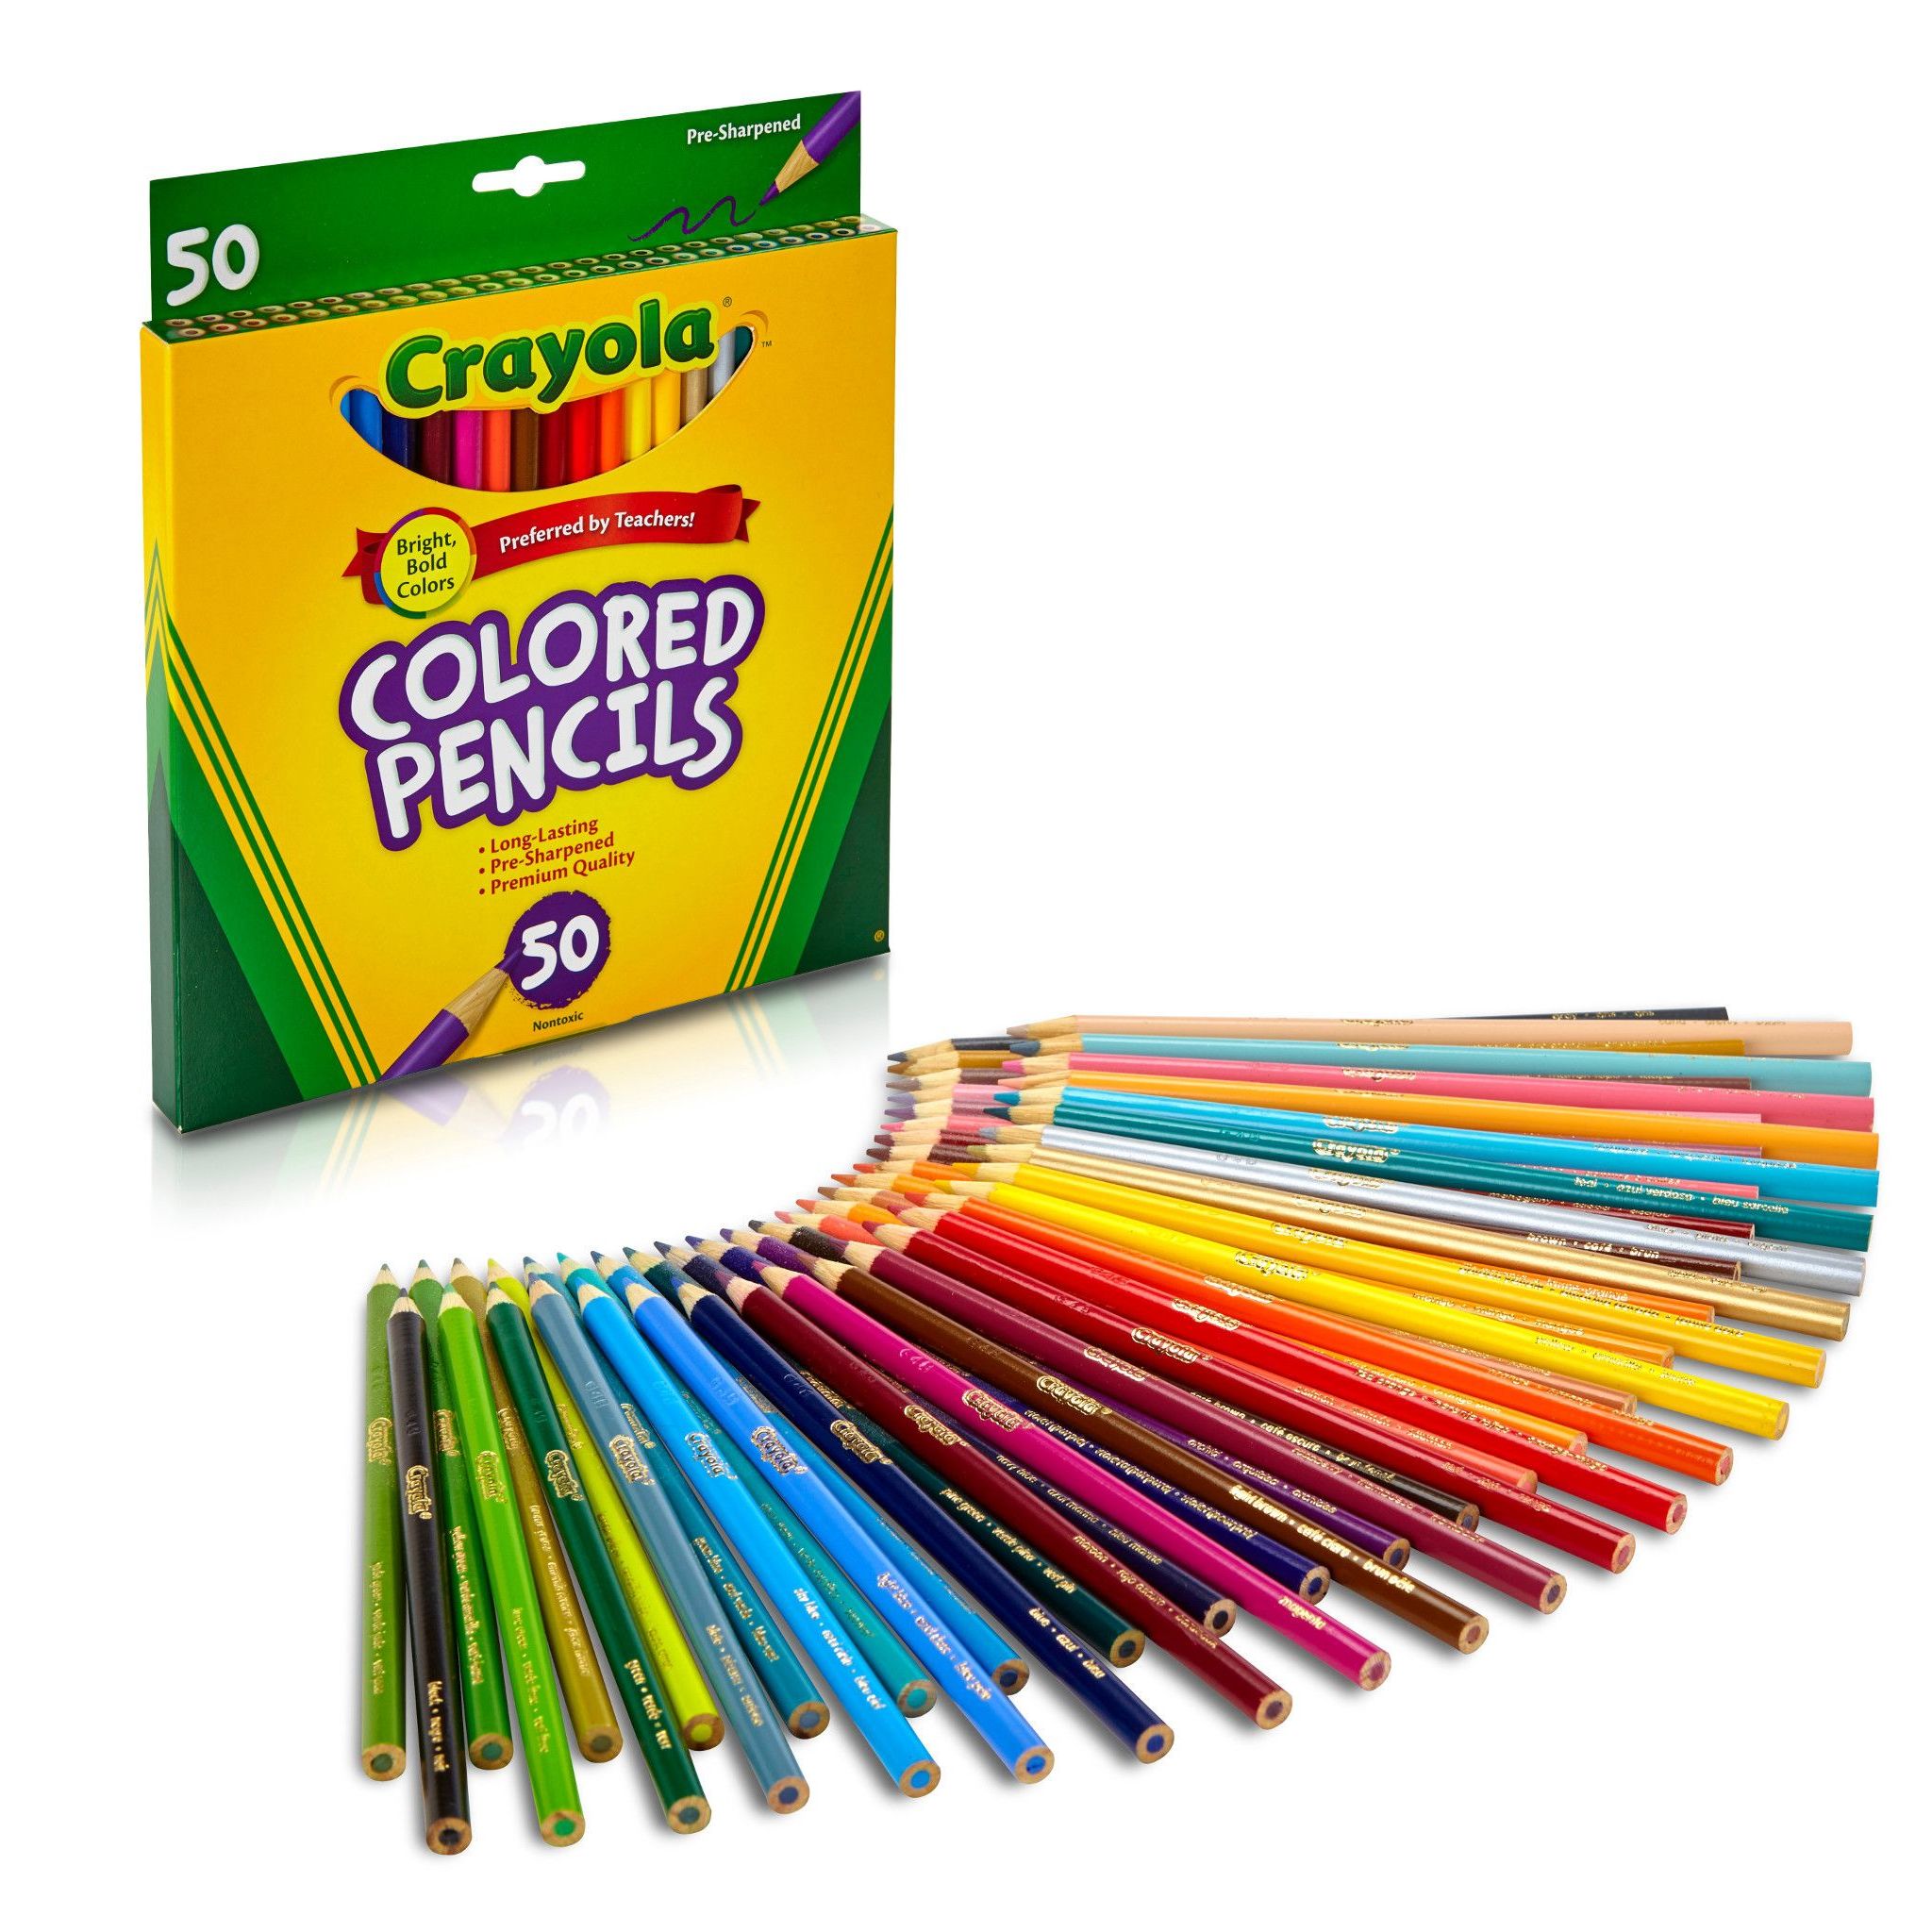 Crayola Colored Pencil Set, 50 Ct, Back to School Supplies for Teachers, Asstd Colors, Beginner Child - image 4 of 10